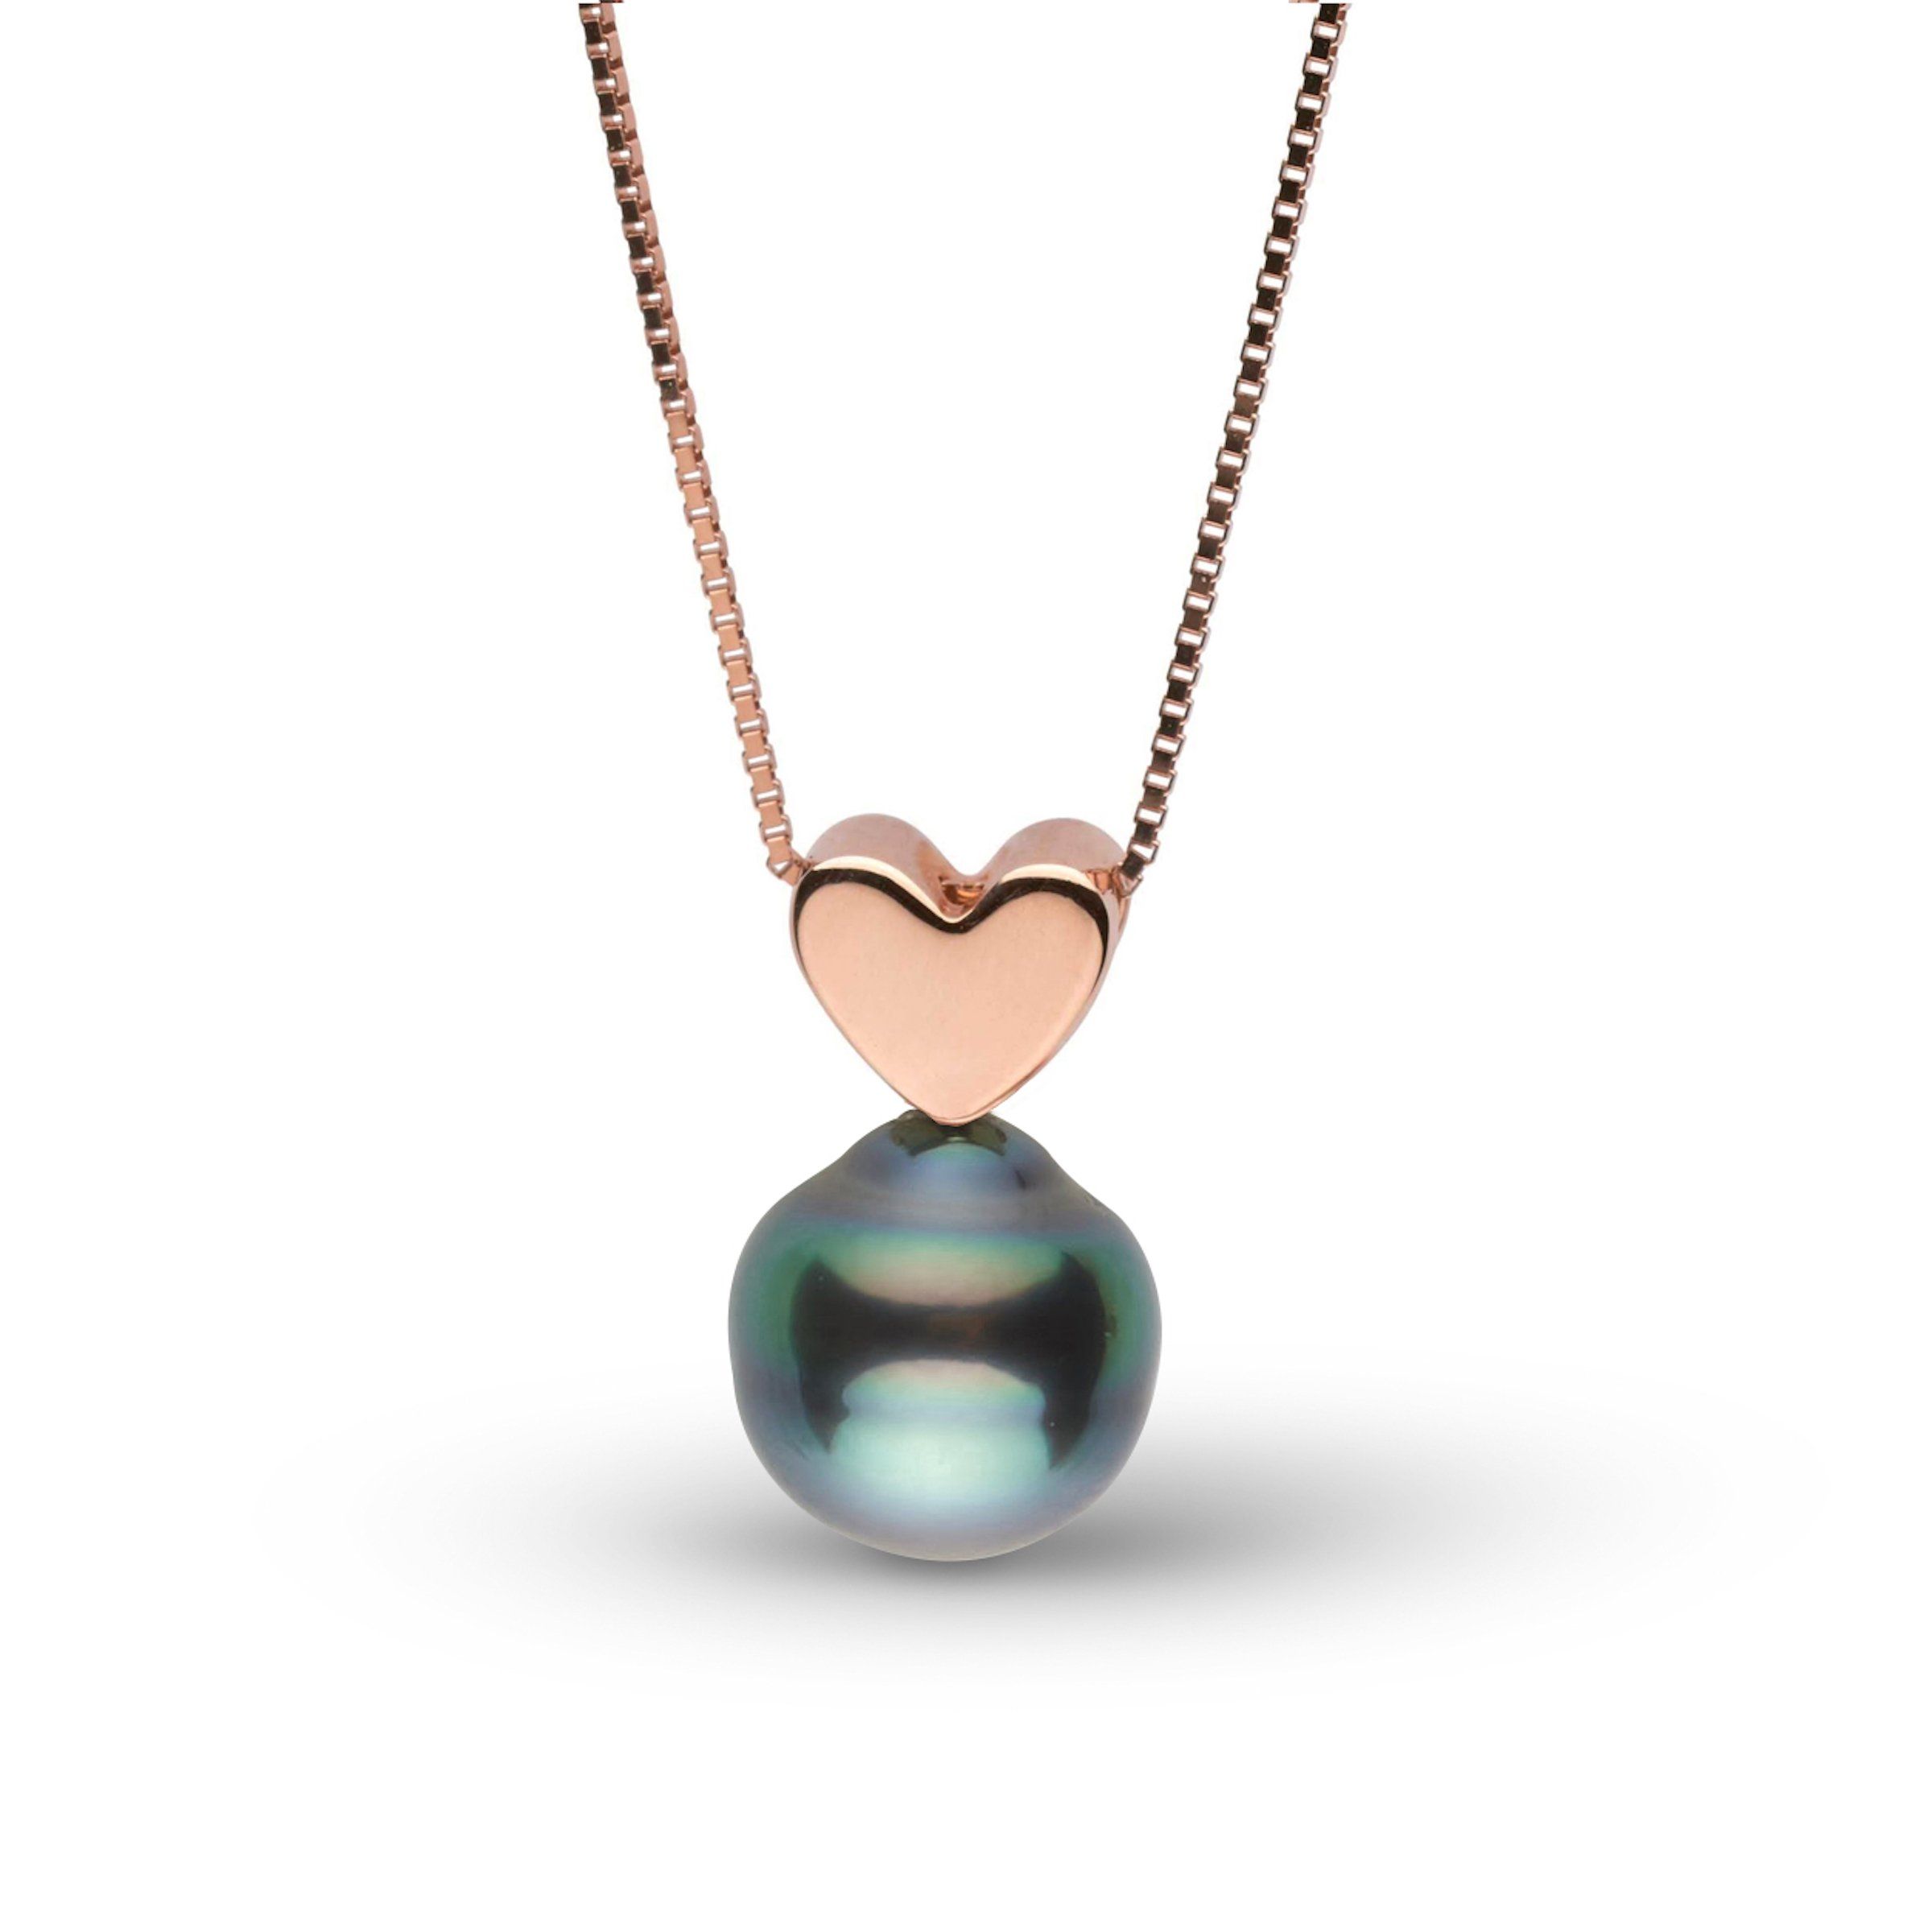 Baby Heart Collection 7.0-8.0 mm Special Peacock Tahitian Baroque Pearl Pendant